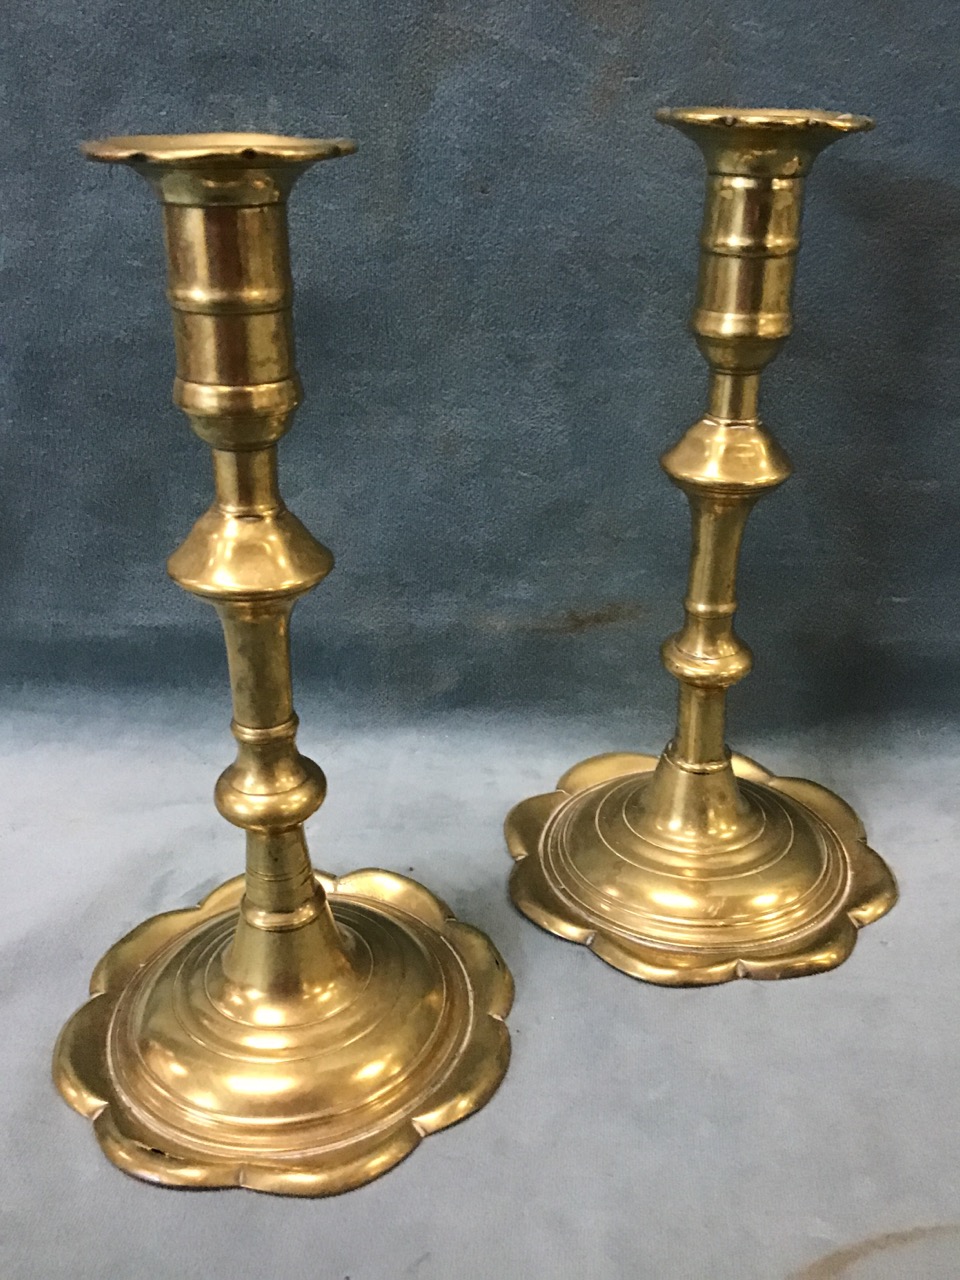 A pair of early brass candlesticks with scalloped rims and bases, having knopped columns and tubular - Bild 2 aus 3